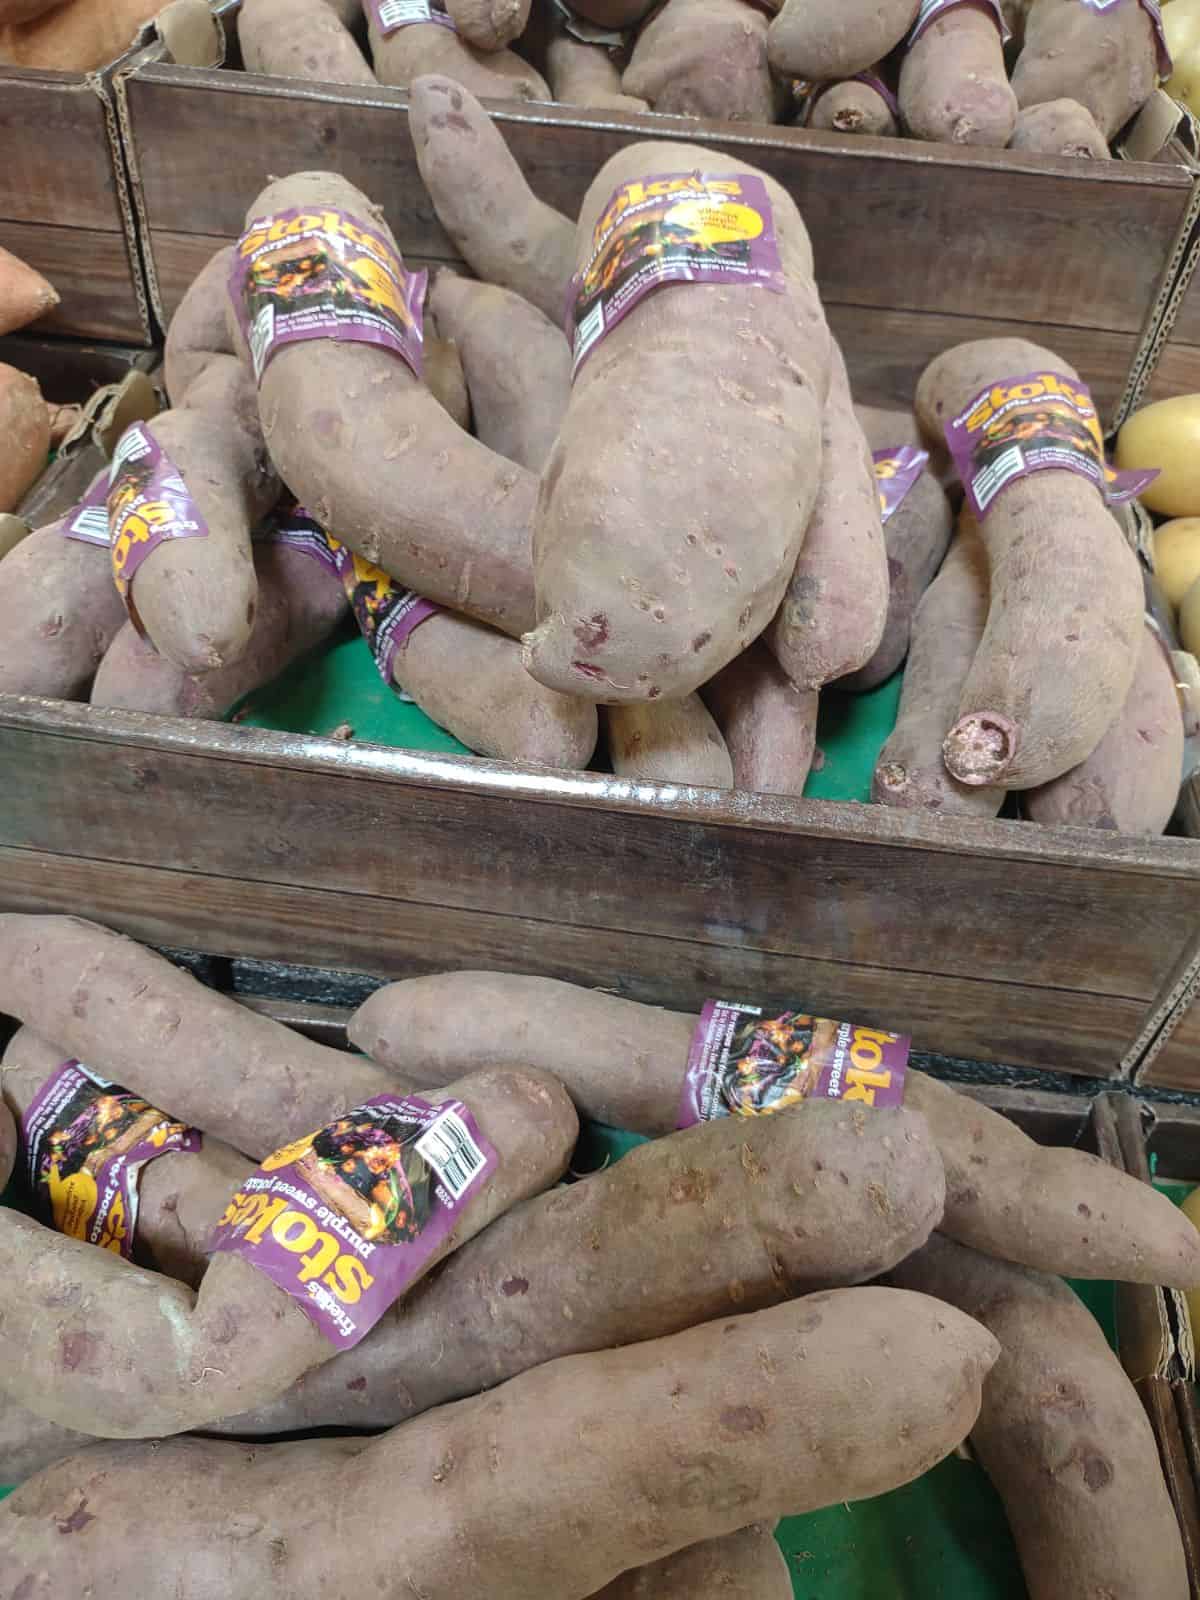 Stokes Purple Sweet Potatoes on display at a Sprouts store.